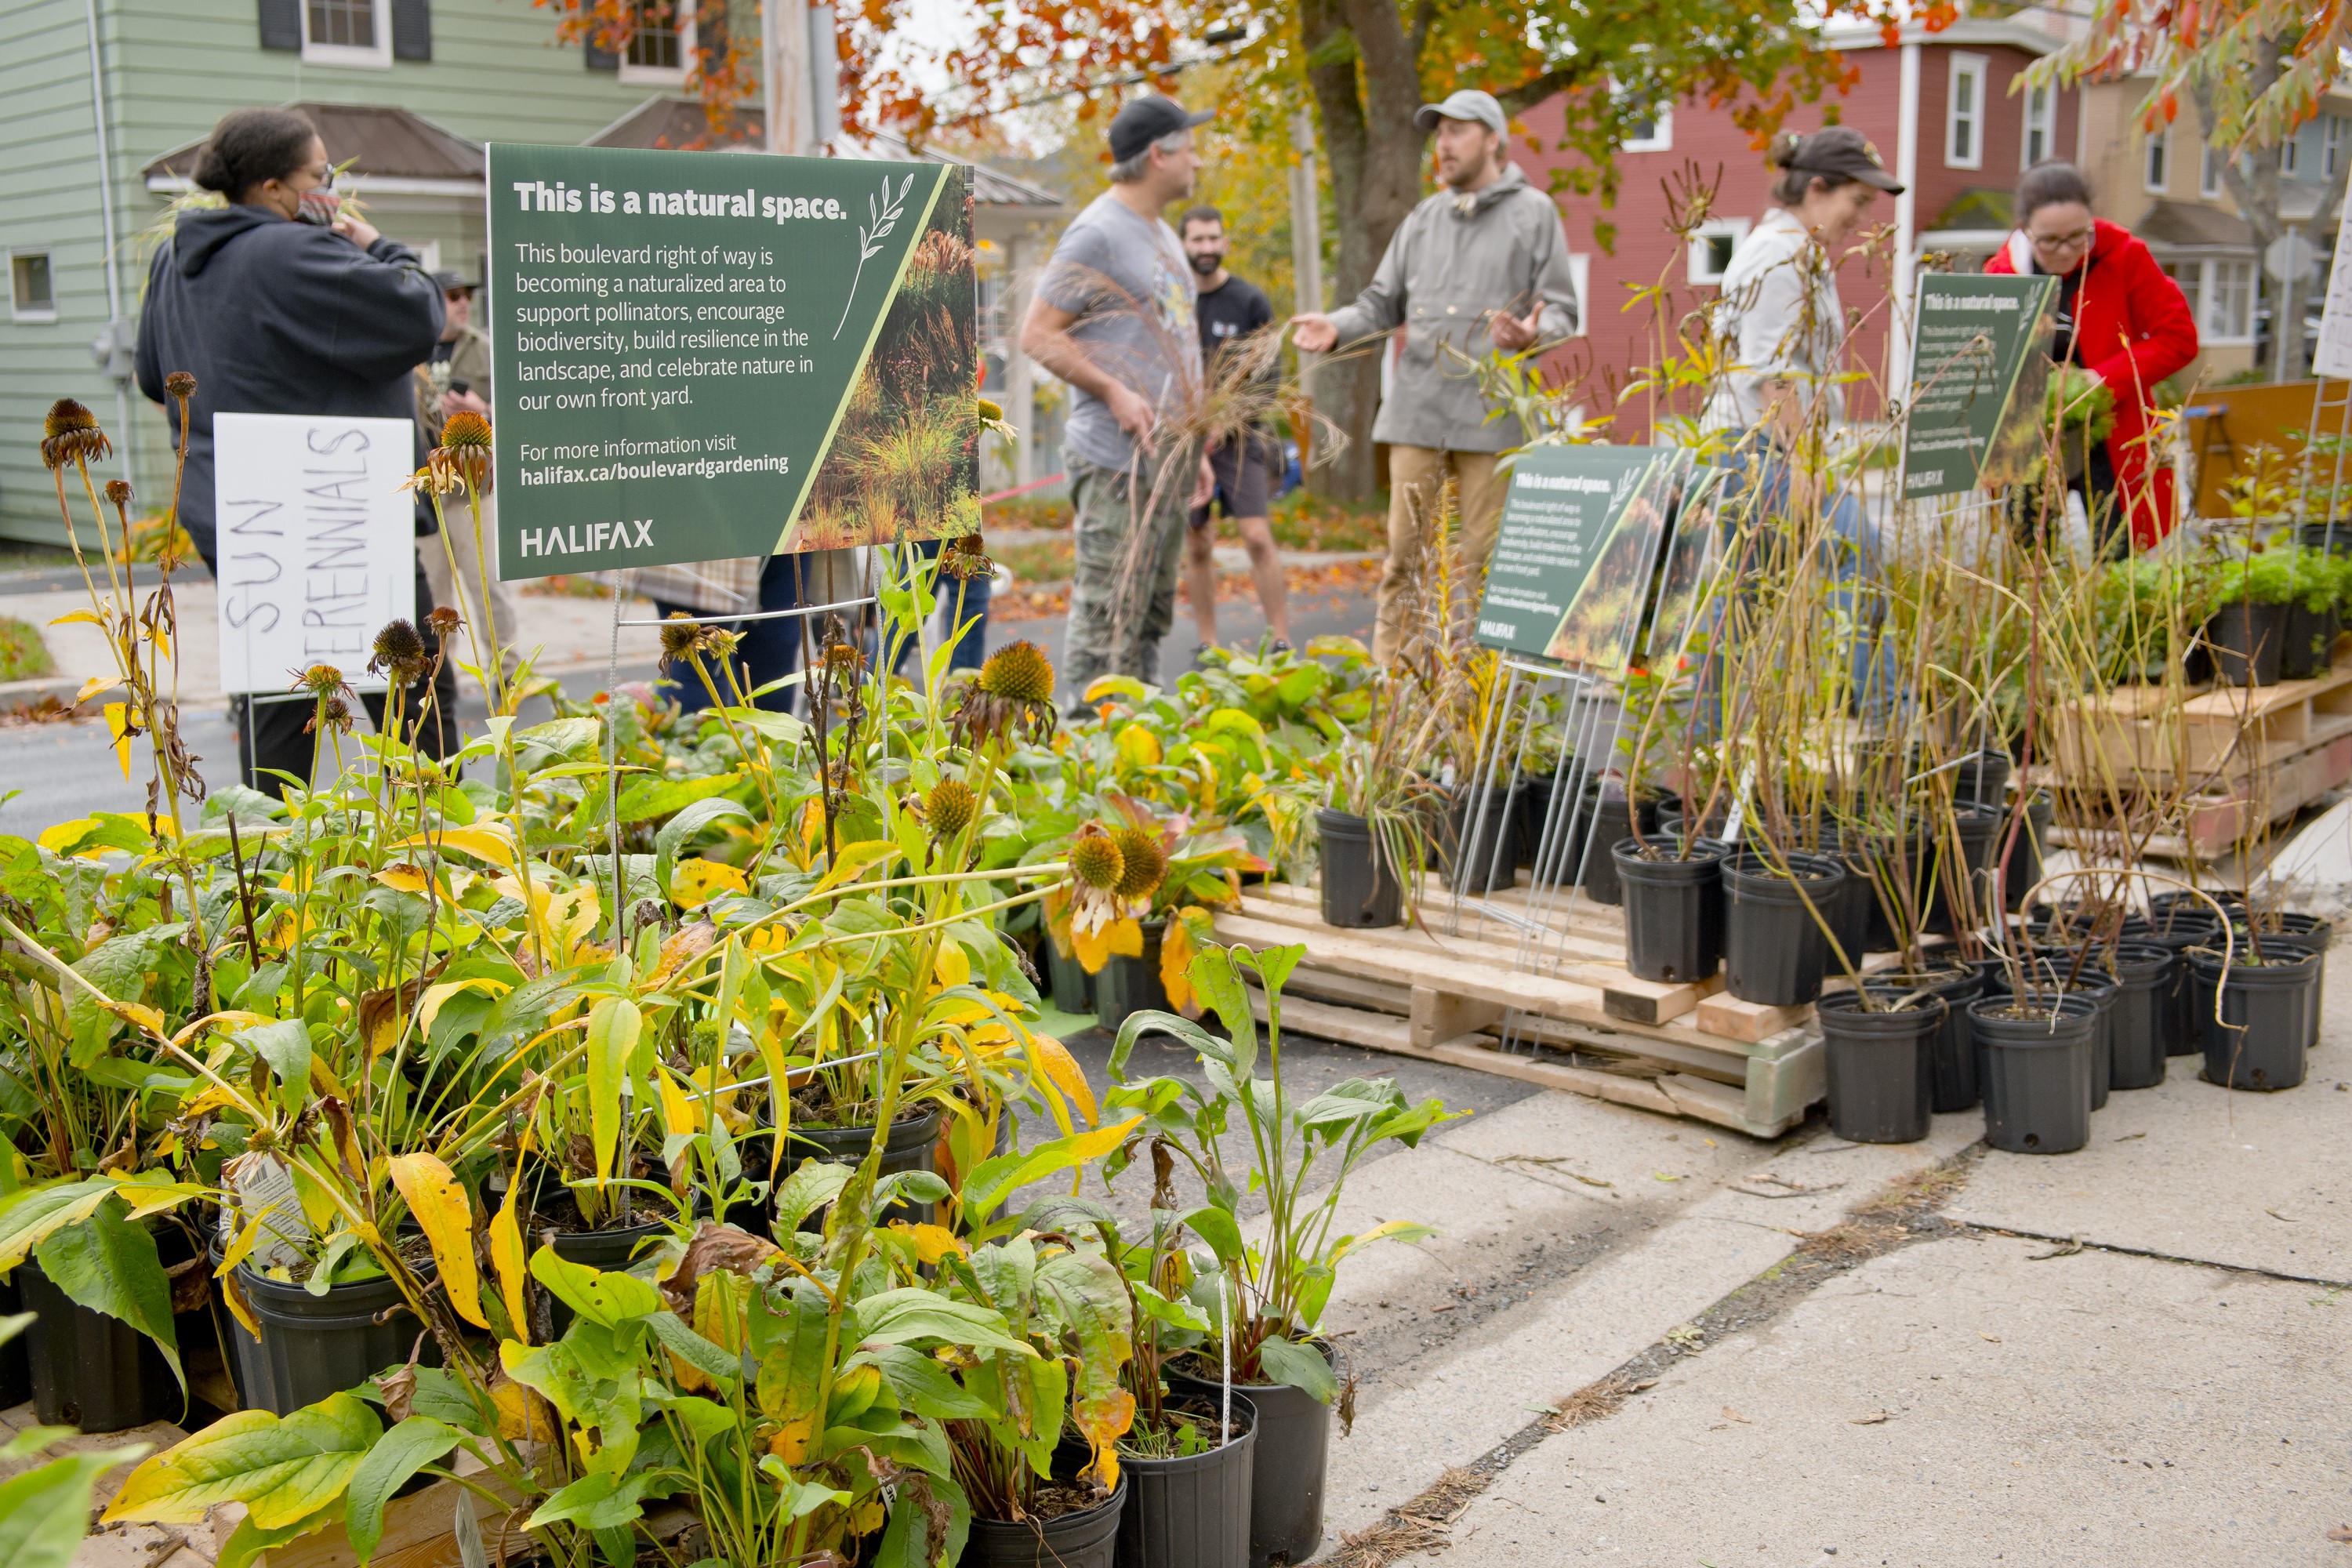 Perennial plants in pots in the foreground, with a sign saying "this is a natural space." Several people in the background talking and looking at plants.